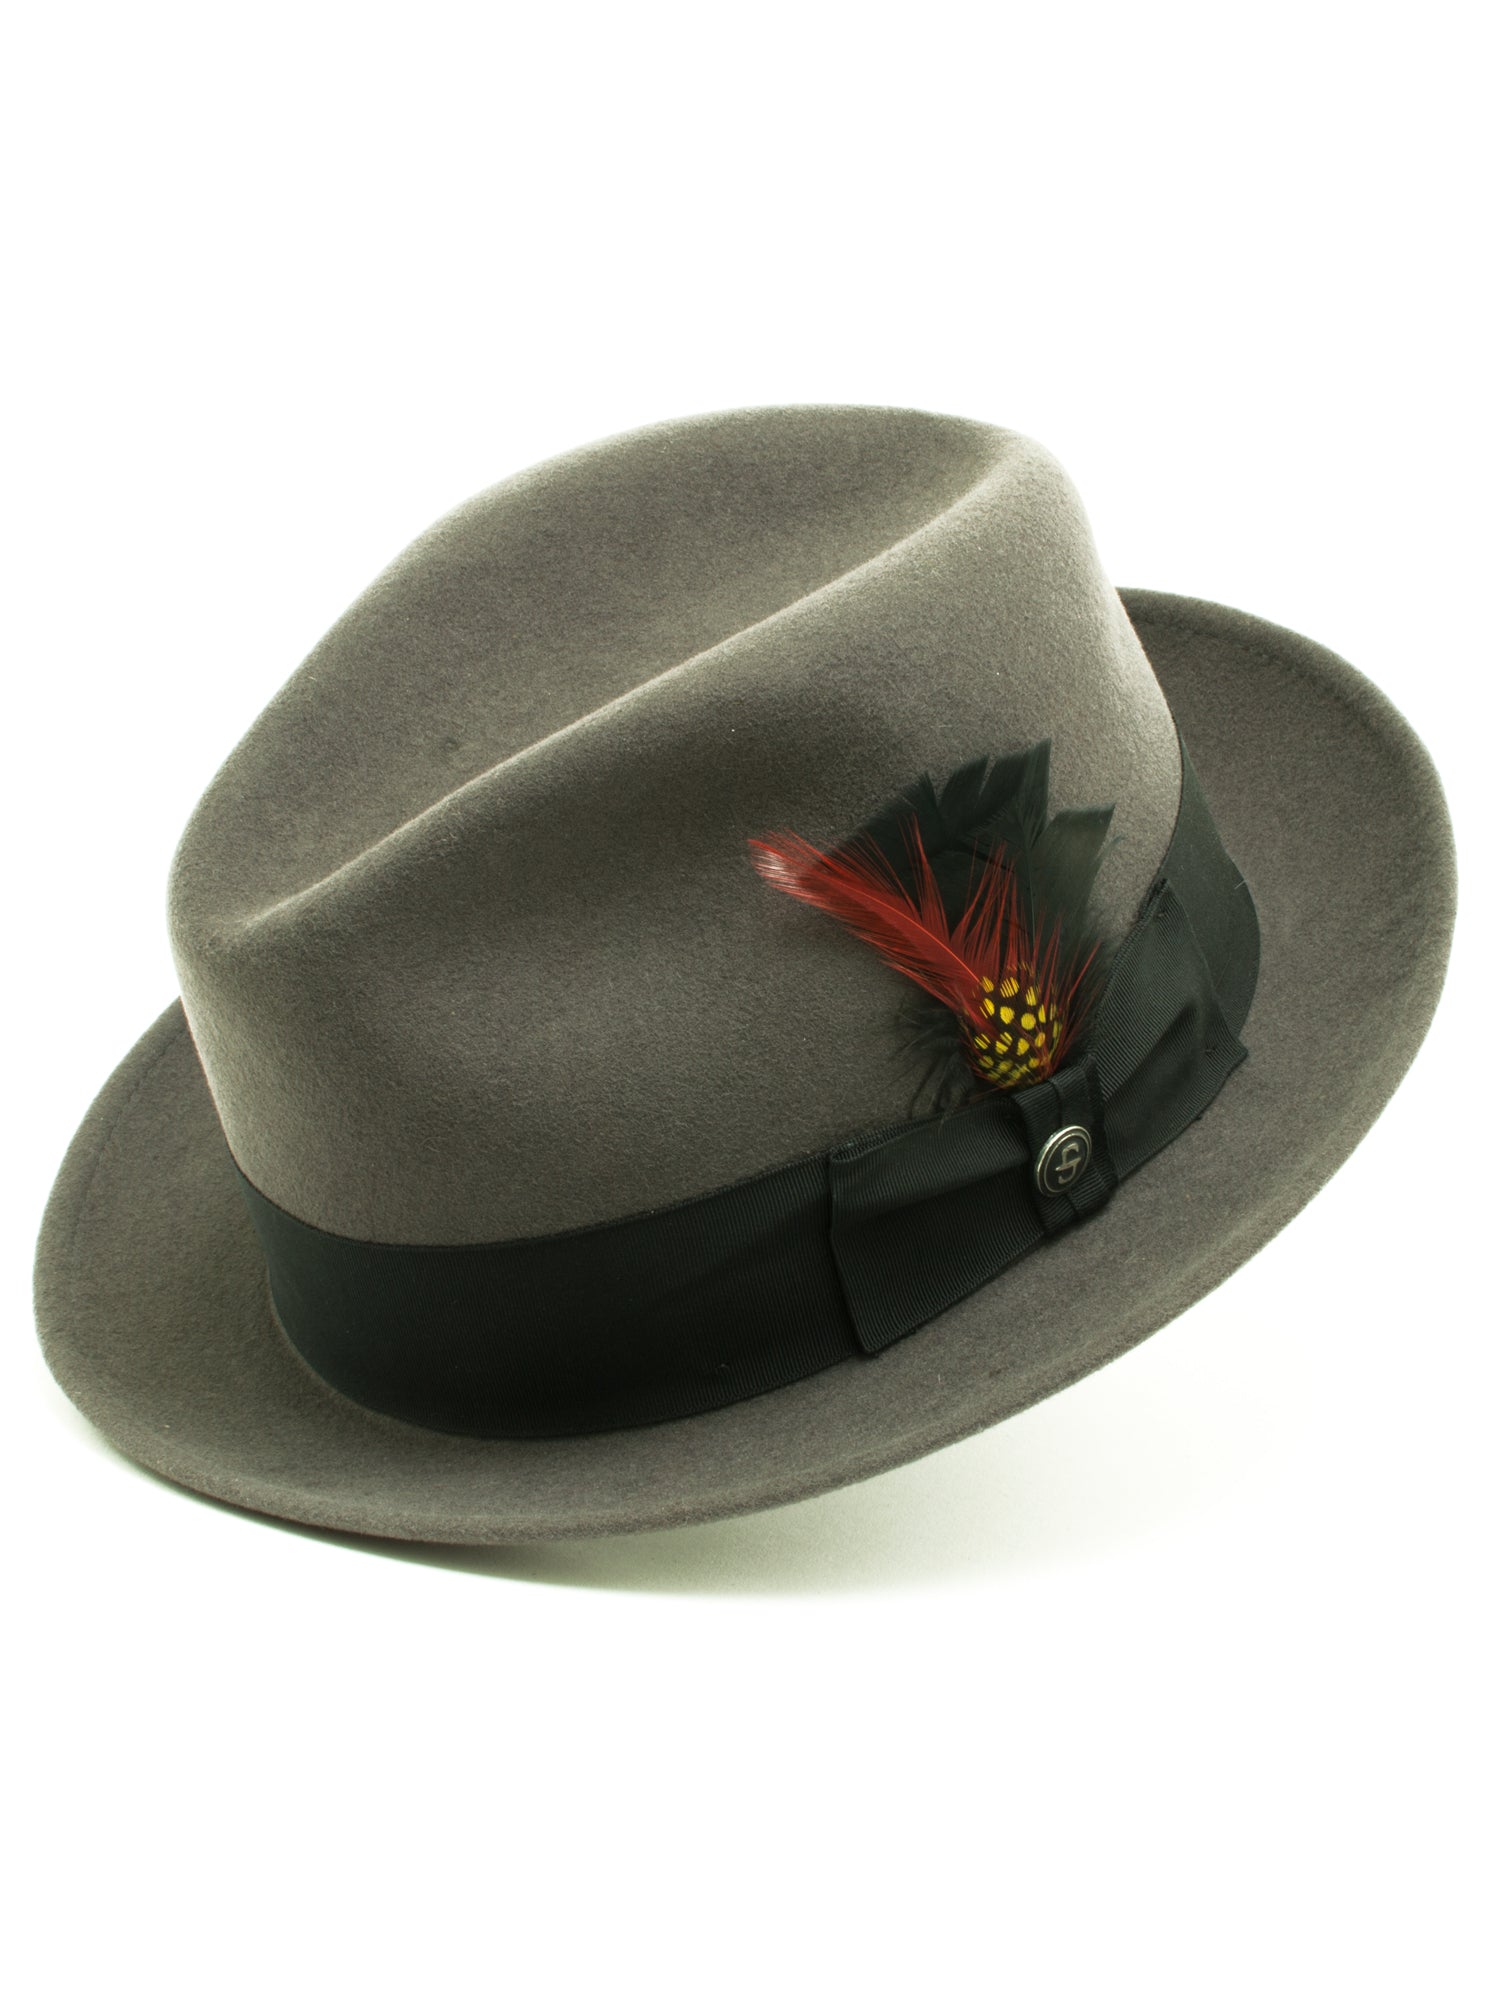 Stetson 100% Pure Wool Felt Frederick Hats in Caribou